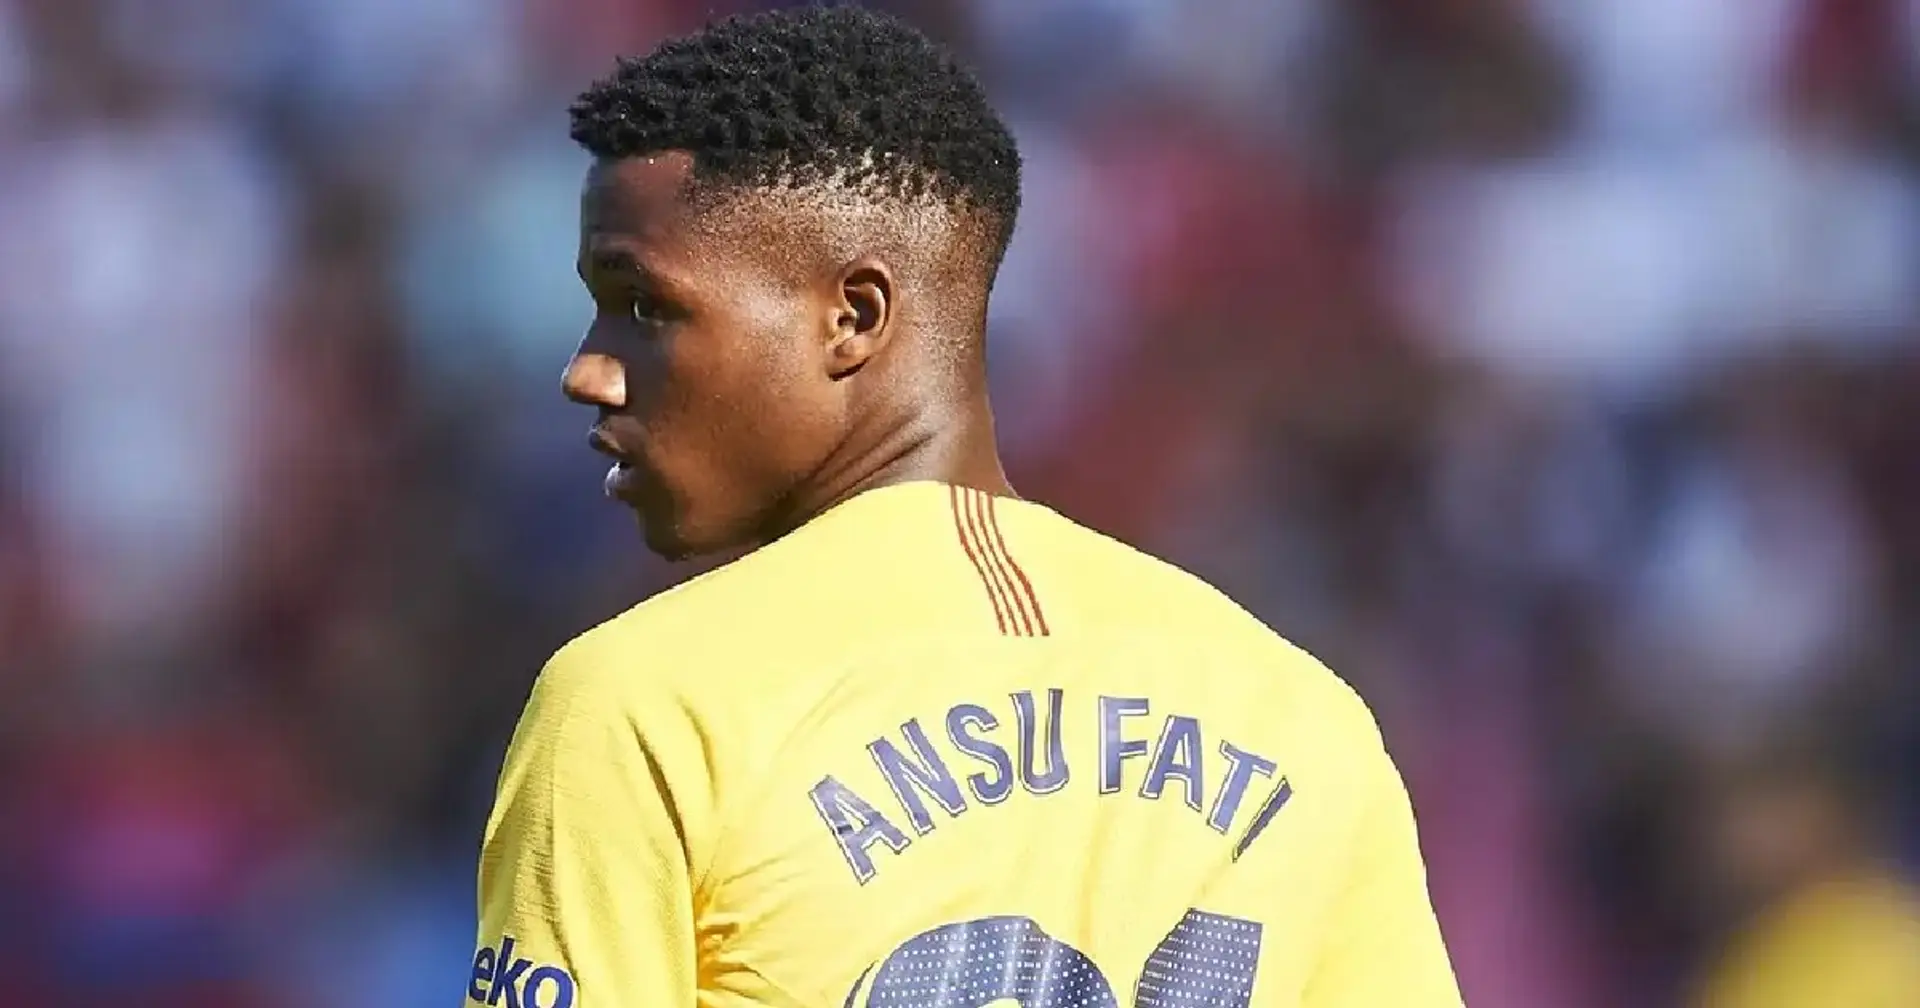 No Barca comeback for Ansu Fati and 2 more big stories you might've missed